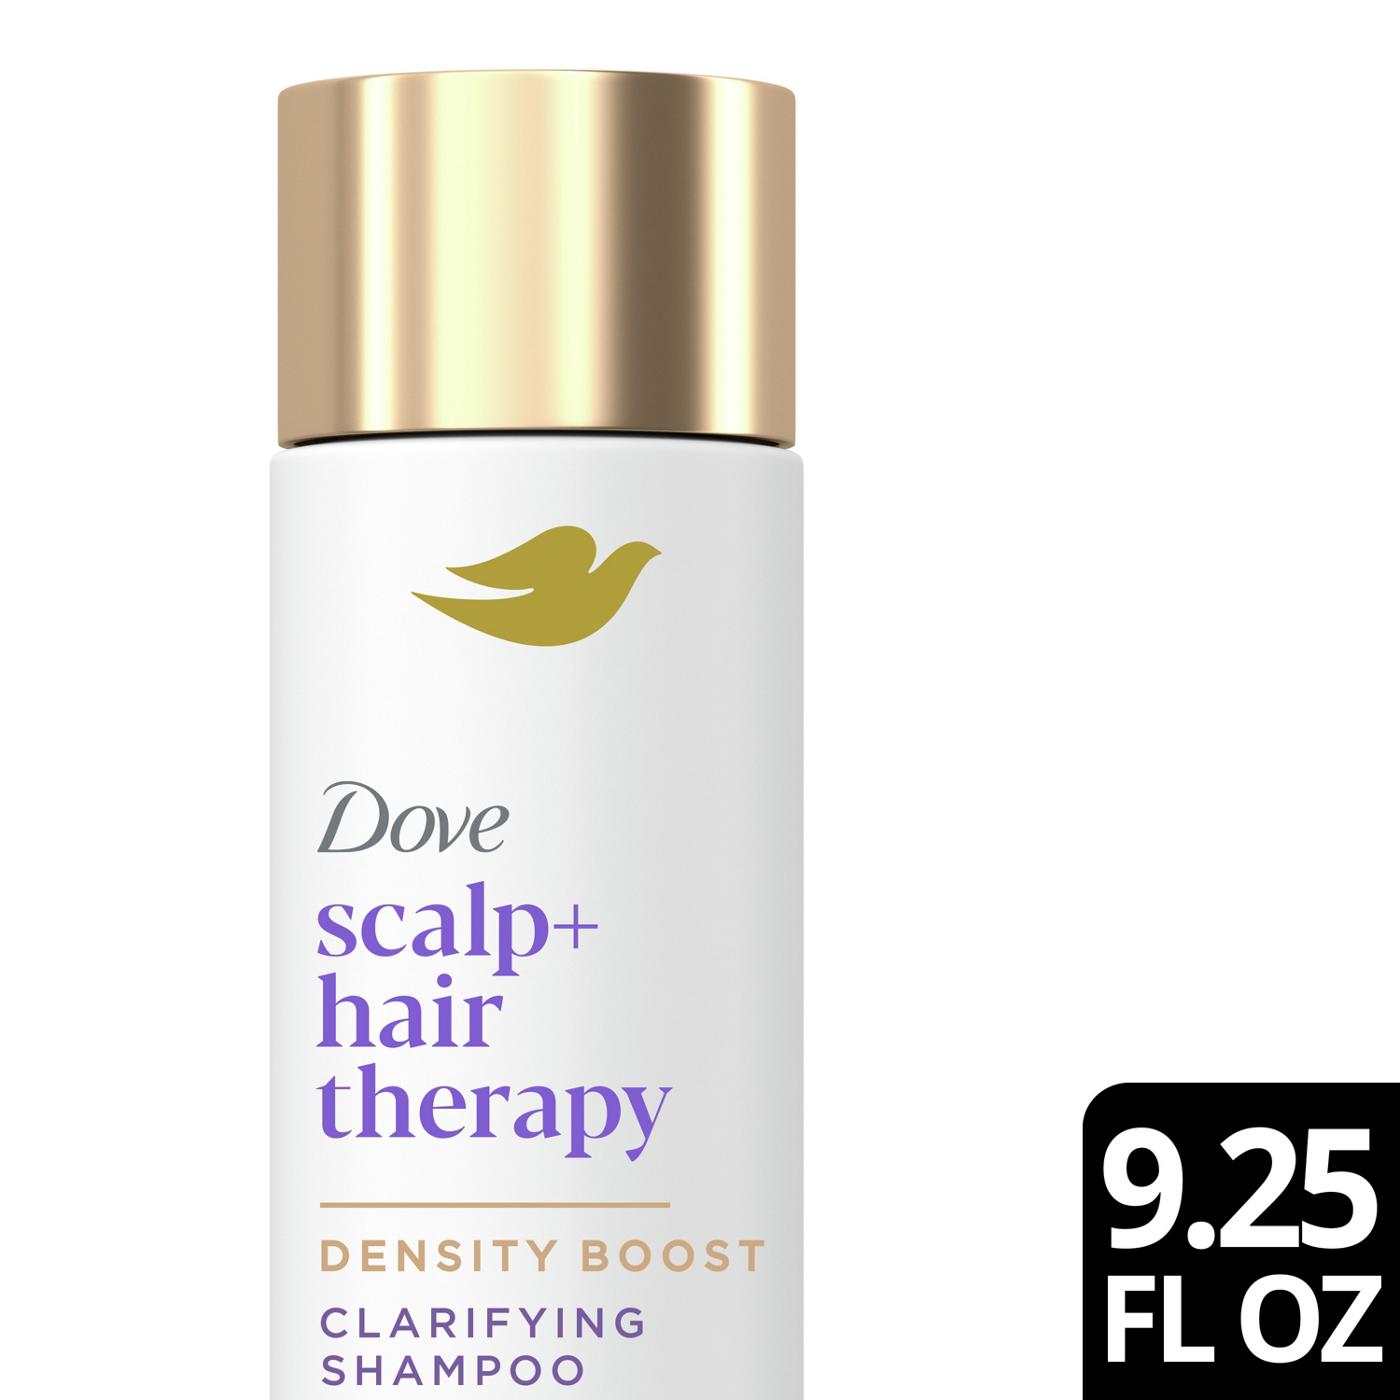 Dove Scalp+ Hair Therapy Clarifying Shampoo; image 3 of 4